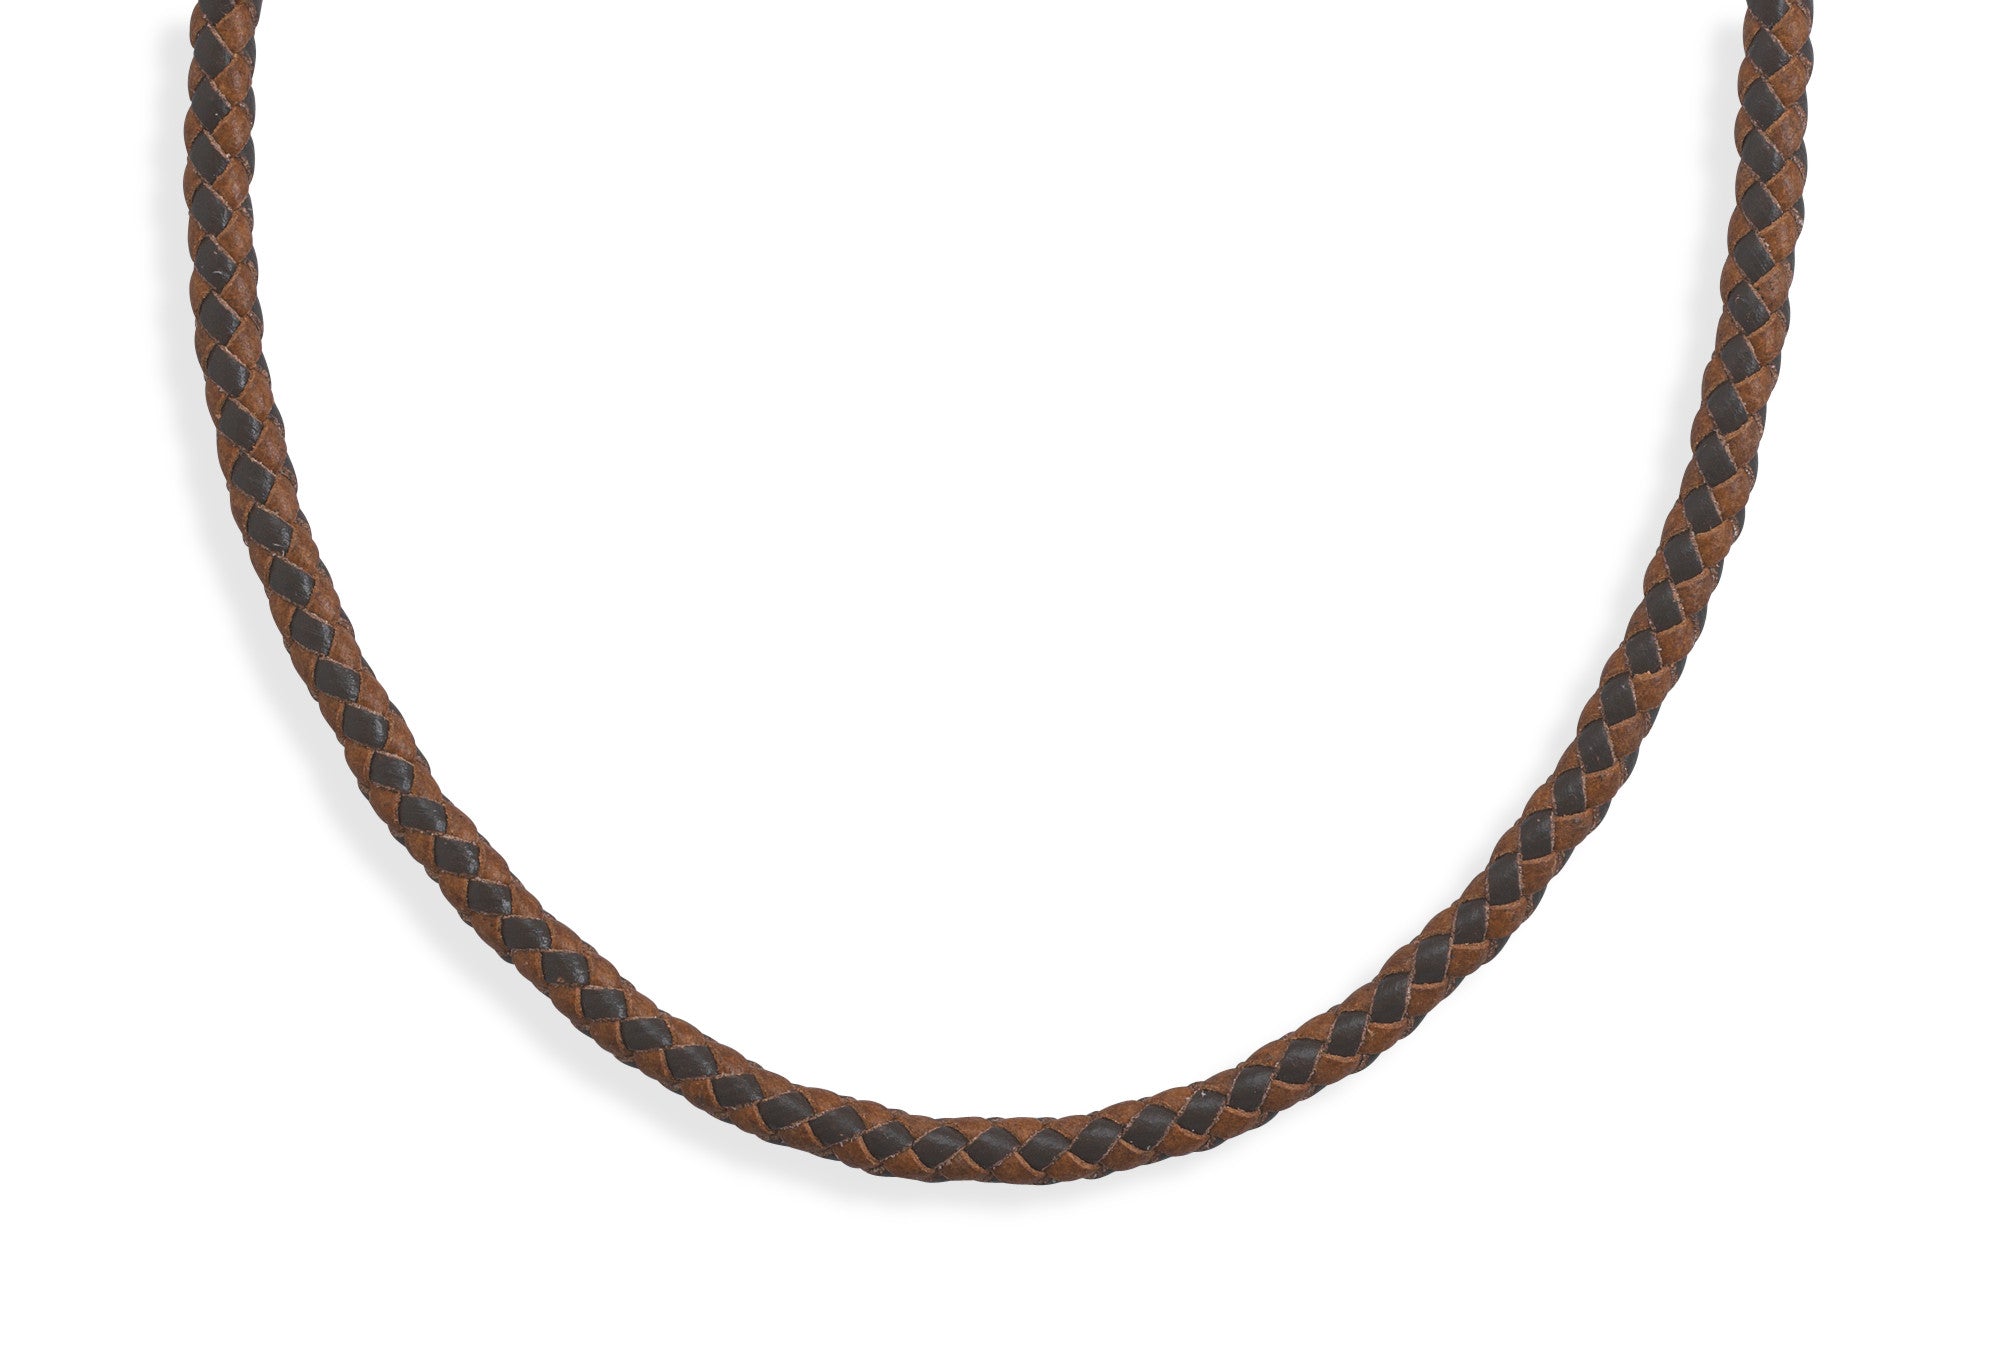 How to Make a Braided Brown Leather and Bead Necklace for Men | Leather  beaded necklace, Braided leather necklace, Diy necklace designs